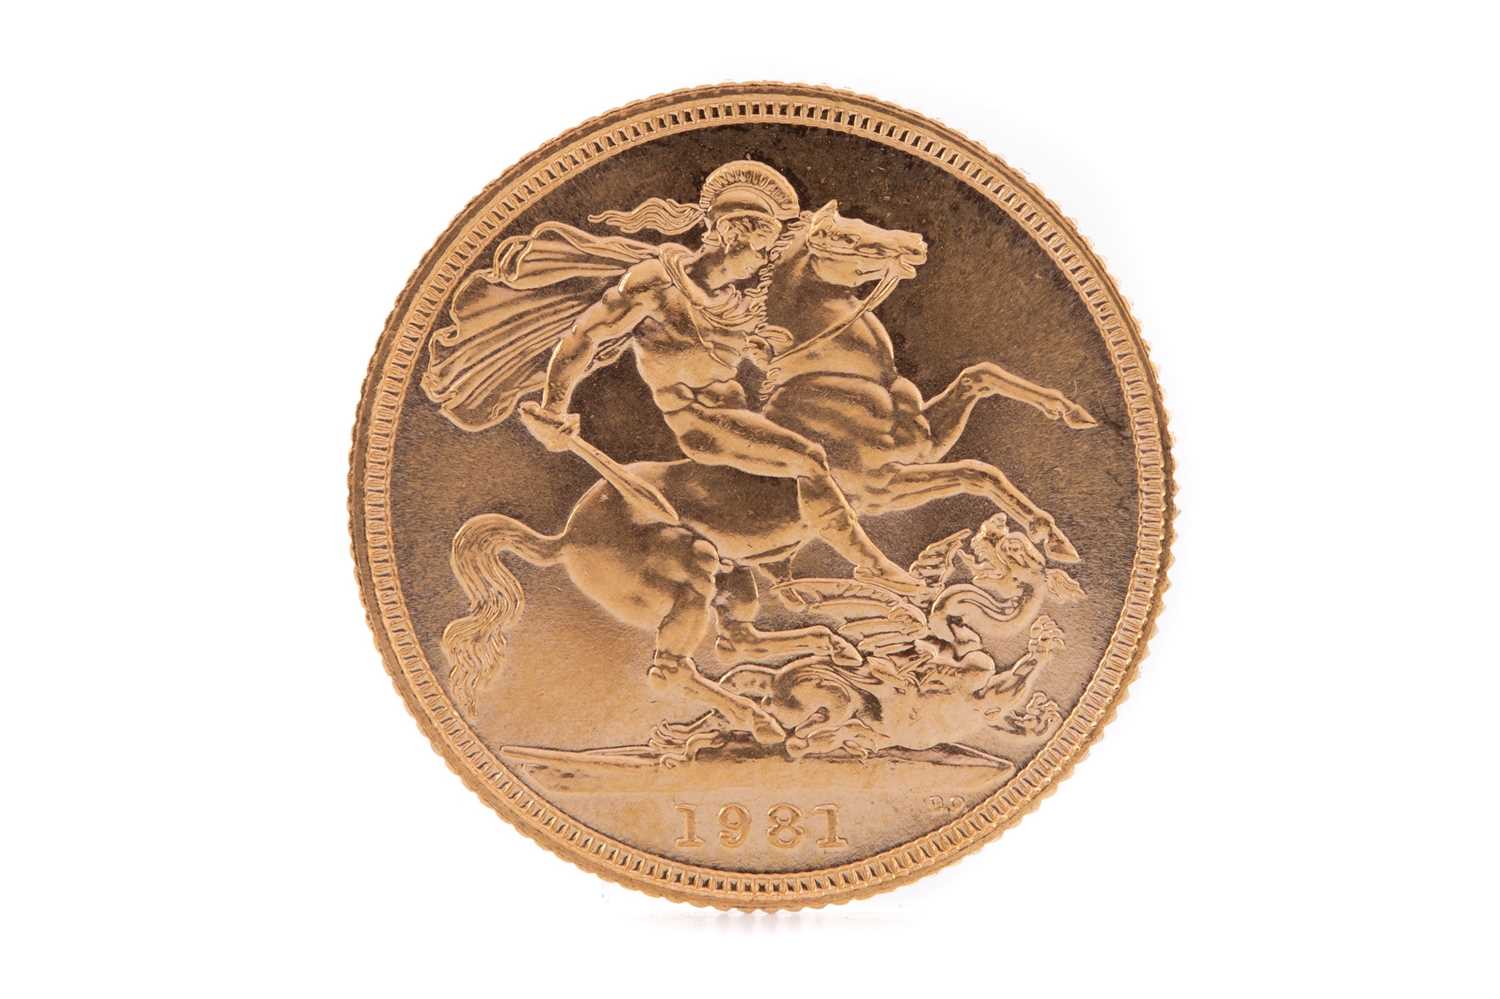 Lot 73 - AN ELIZABETH II GOLD SOVEREIGN DATED 1981